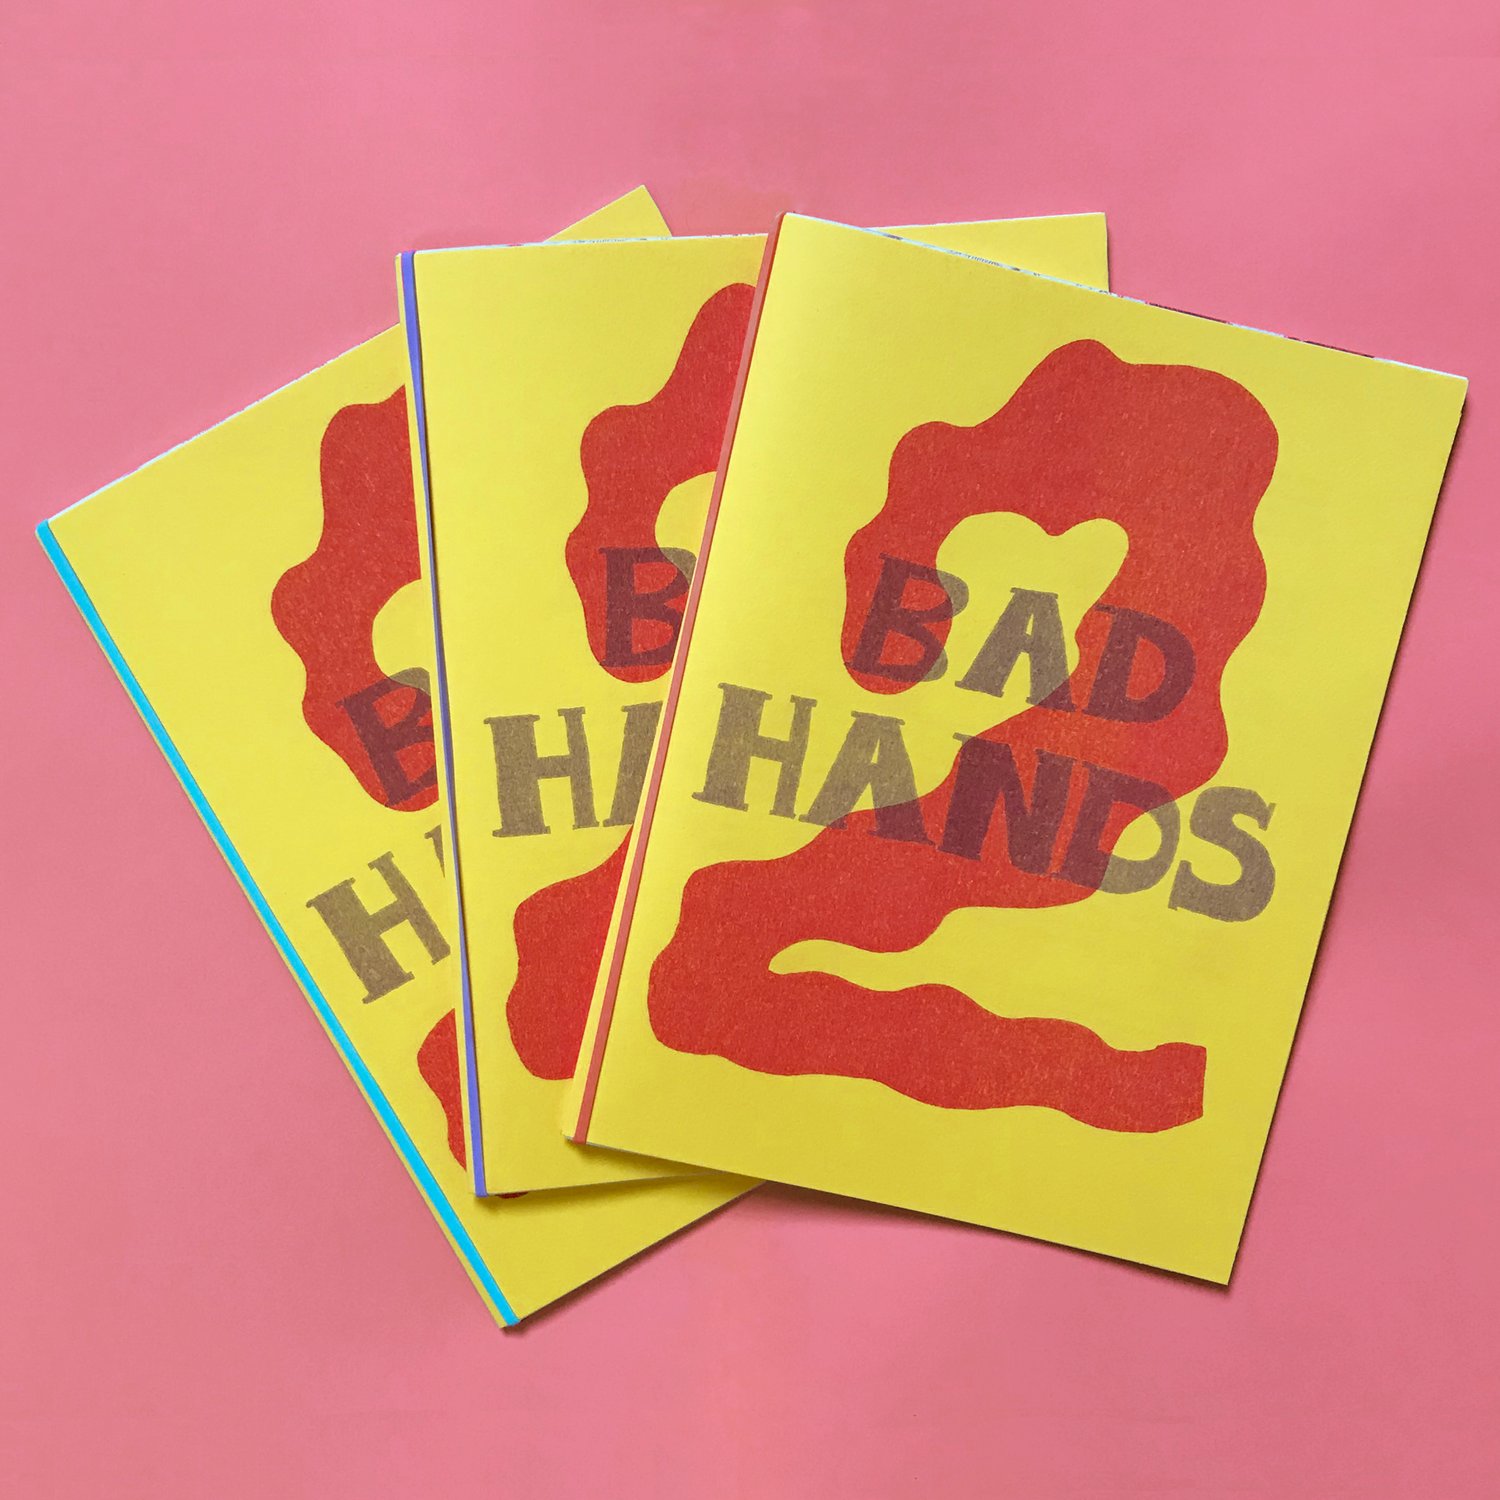 Bad Hands Issue 2